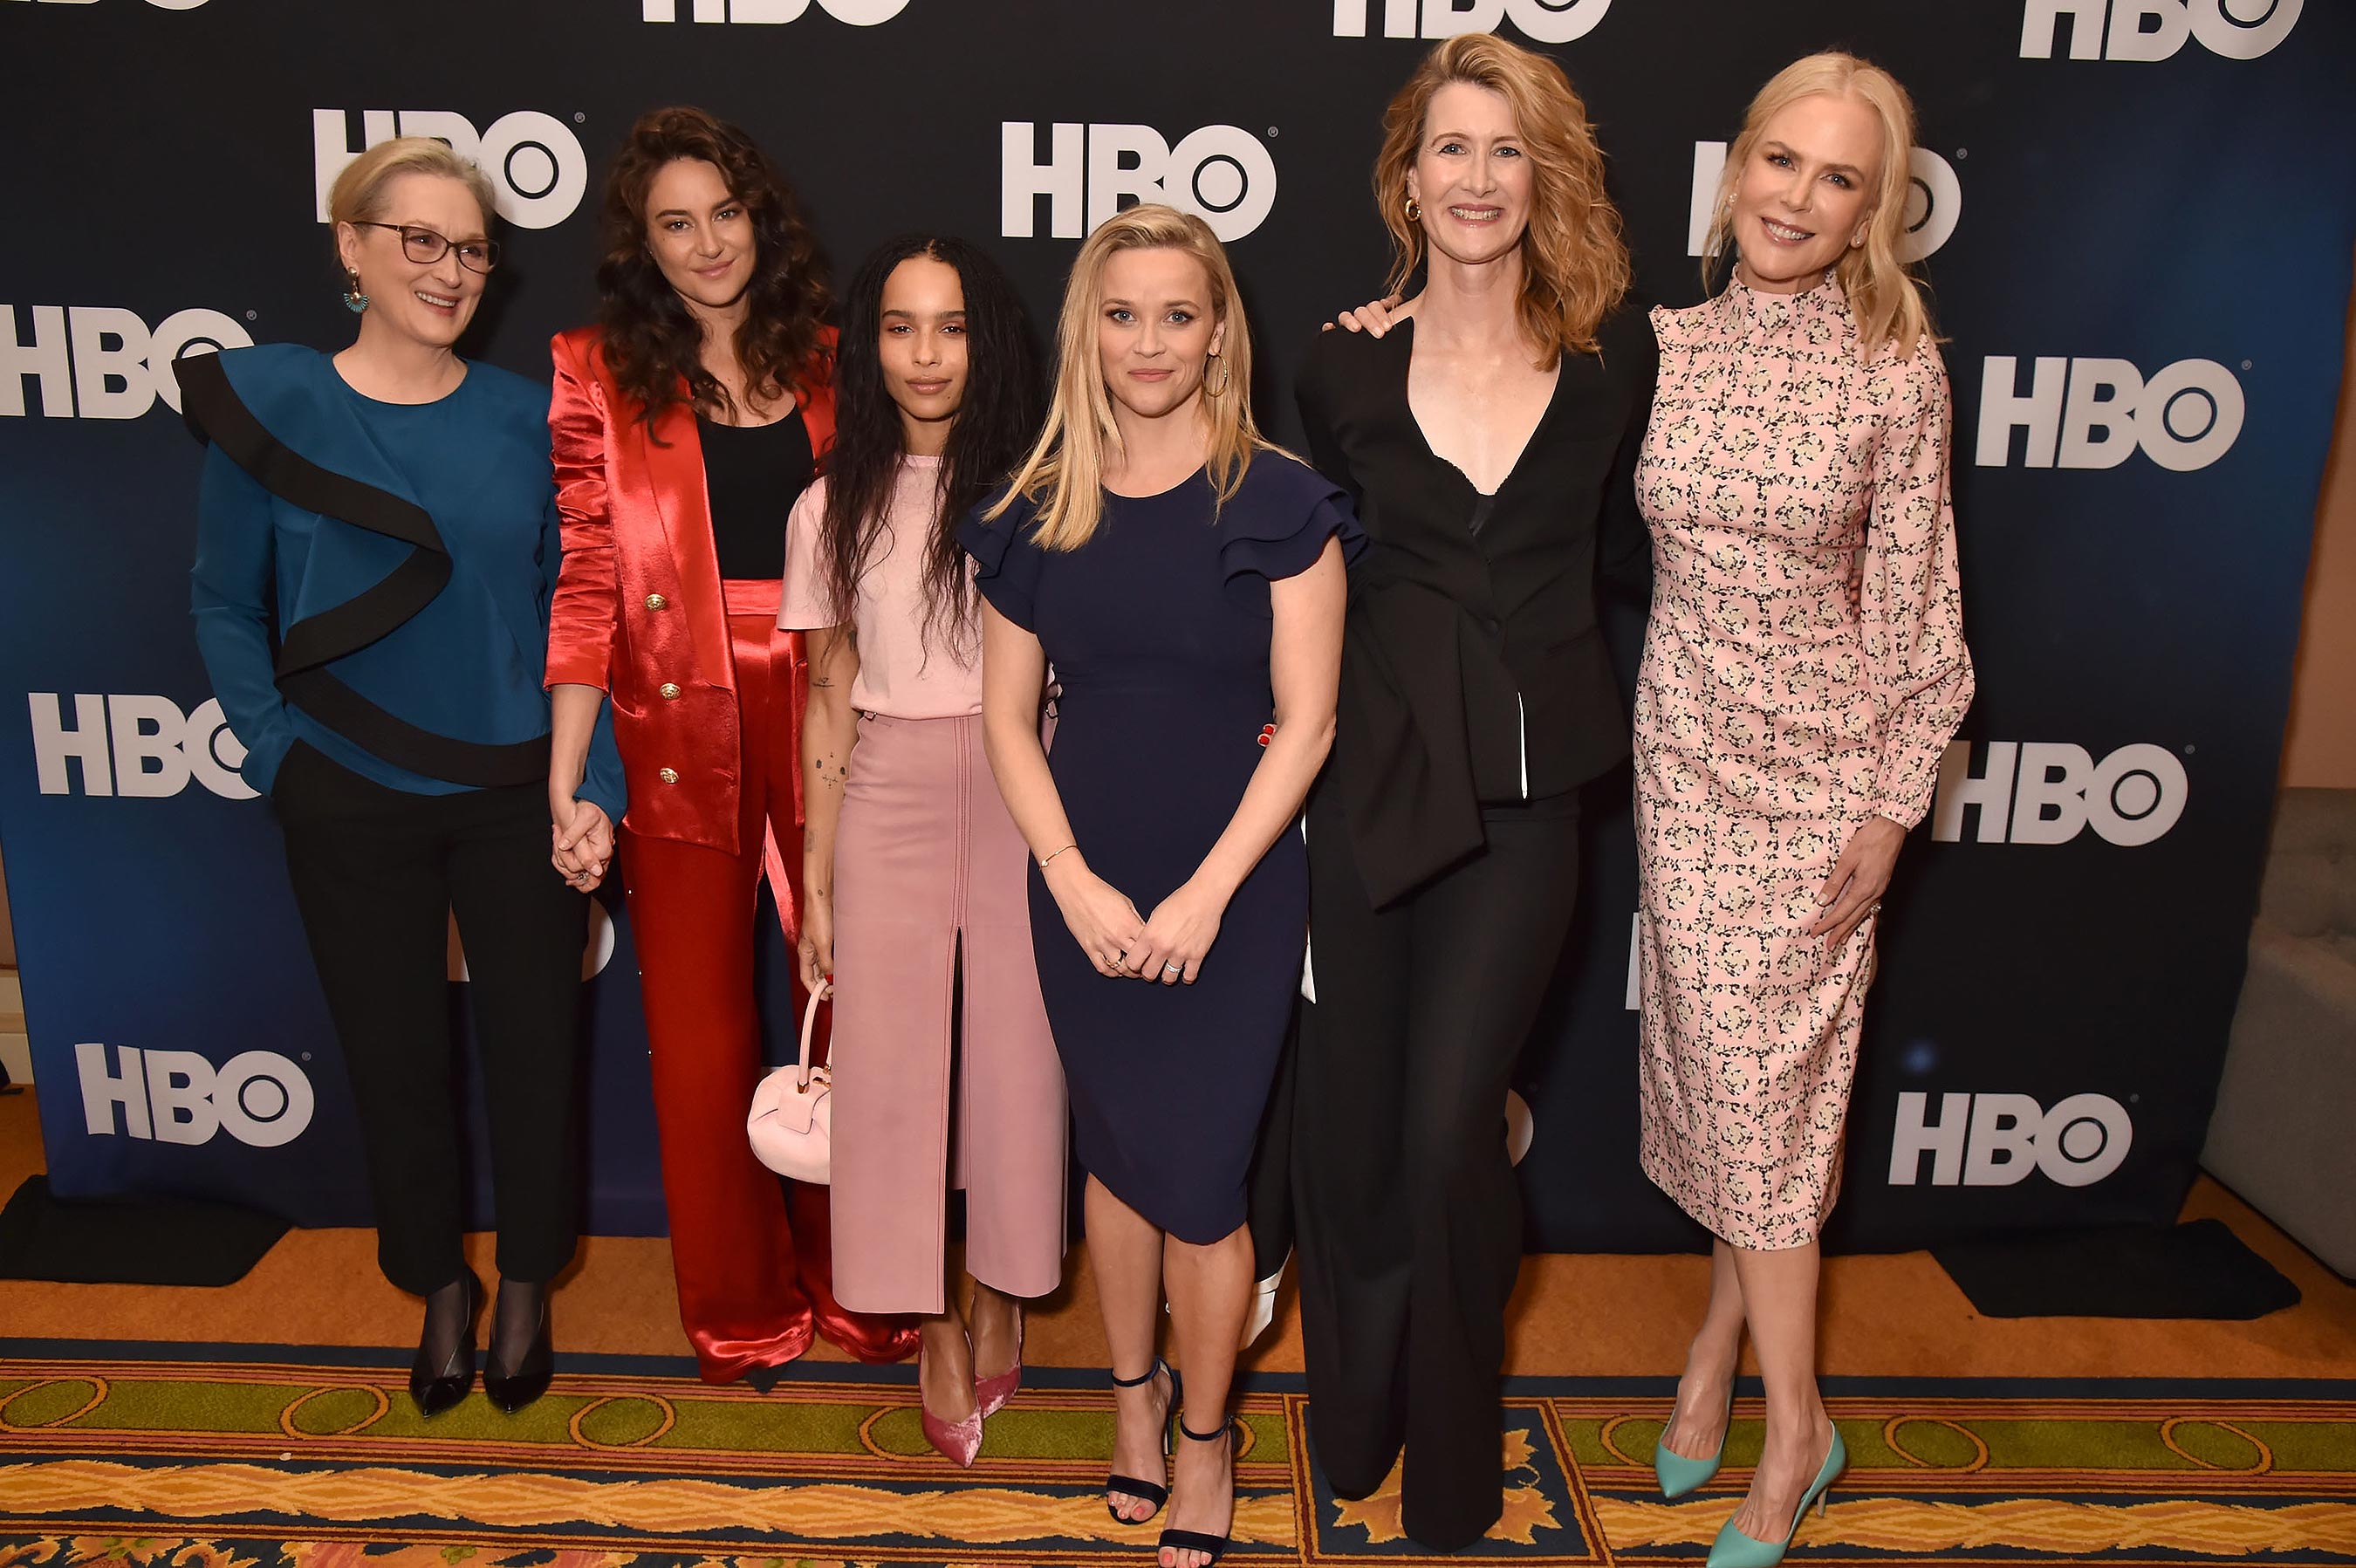 PASADENA, CA - FEBRUARY 08:  (L-R) Actors Meryl Streep, Shailene Woodley, Zoe Kravitz, Reese Witherspoon, Laura Dern and Nicole Kidman are seen prior to the "Big Little Lies" panel of the HBO portion of the 2019 Winter TCA on February 8, 2019 in Pasadena, California.  (Photo by Jeff Kravitz/FilmMagic for HBO)